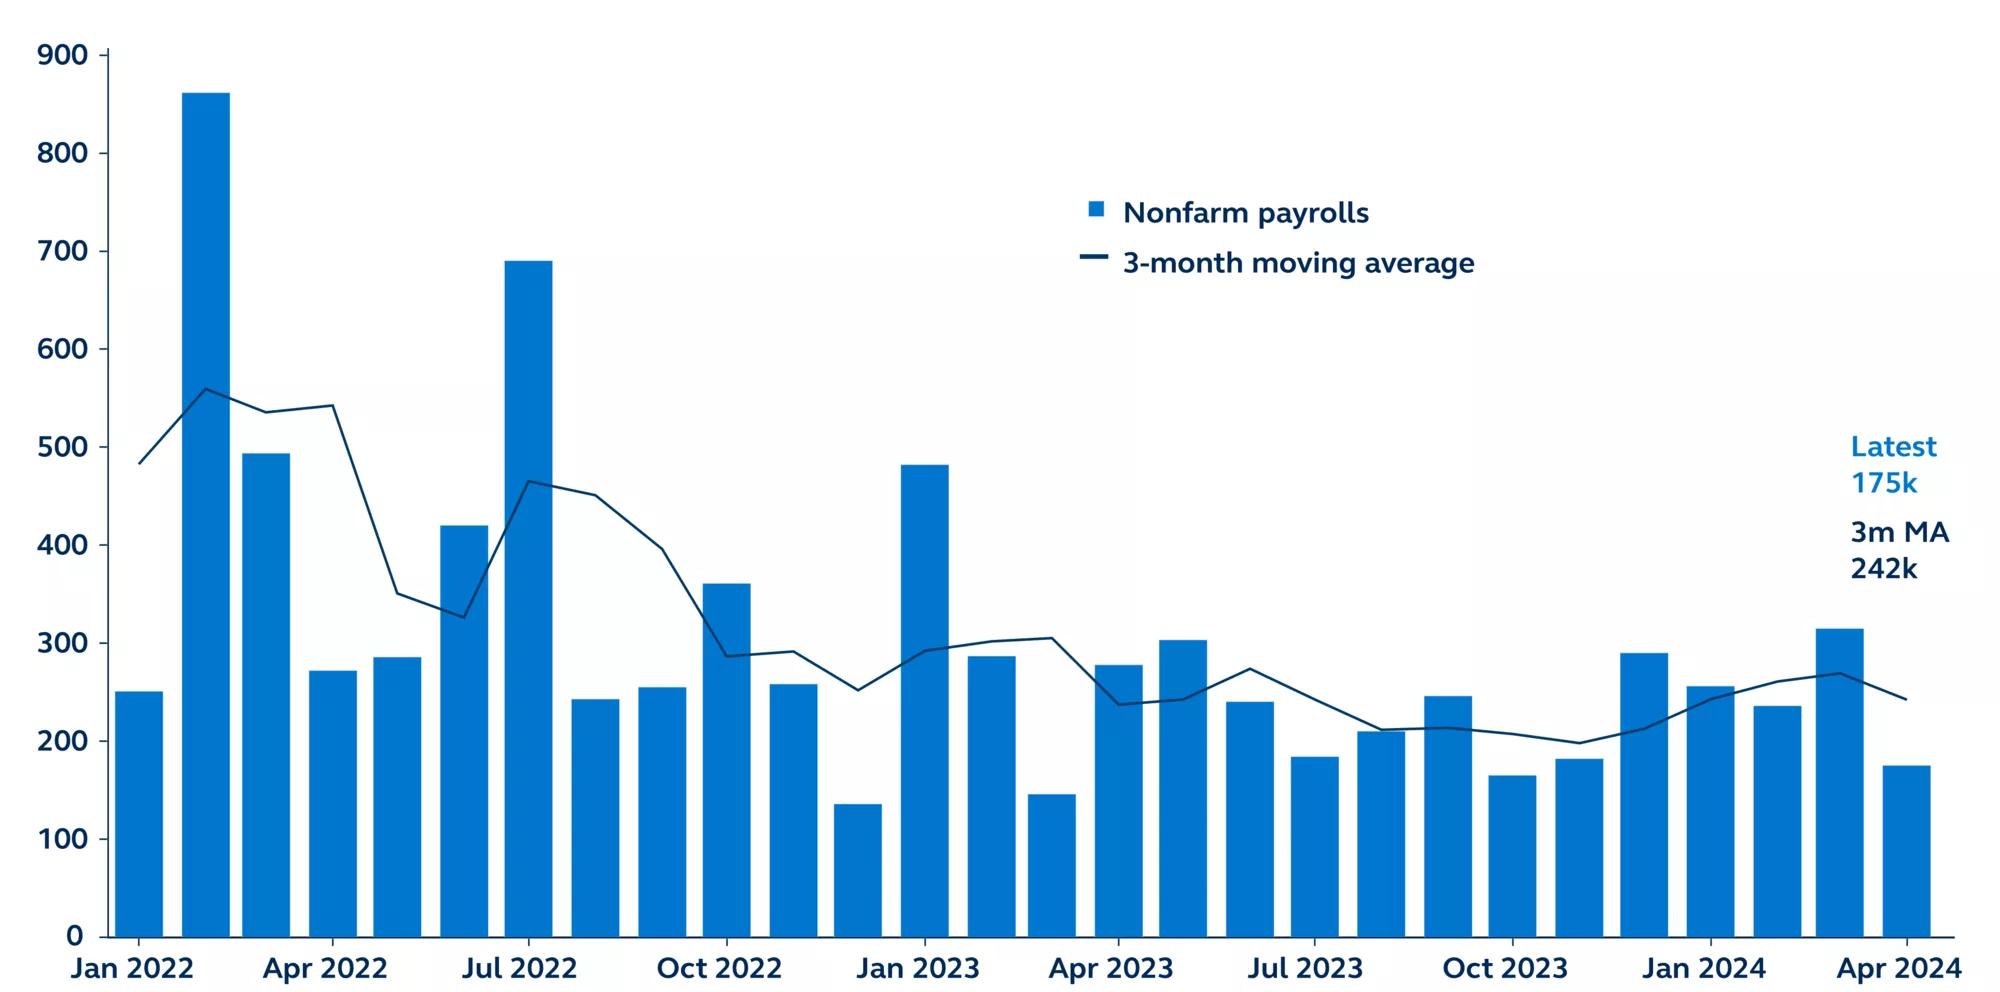 Monthly Non-farm payrolls and 3-month moving average since January 2022